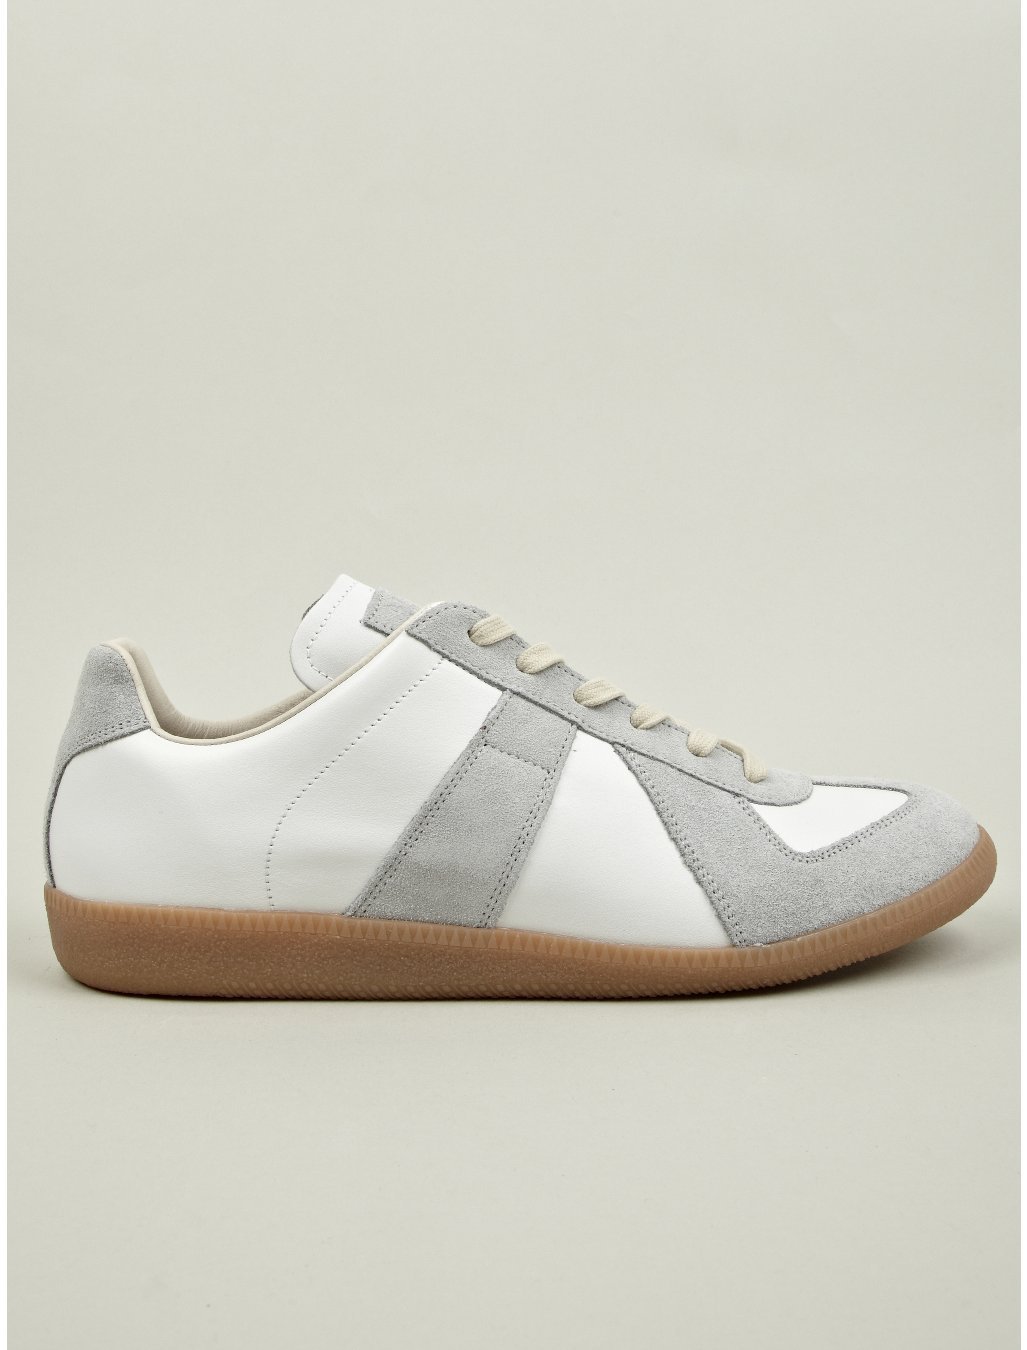 It’s On Sale: Common Projects and Margiela Sneakers – Put This On